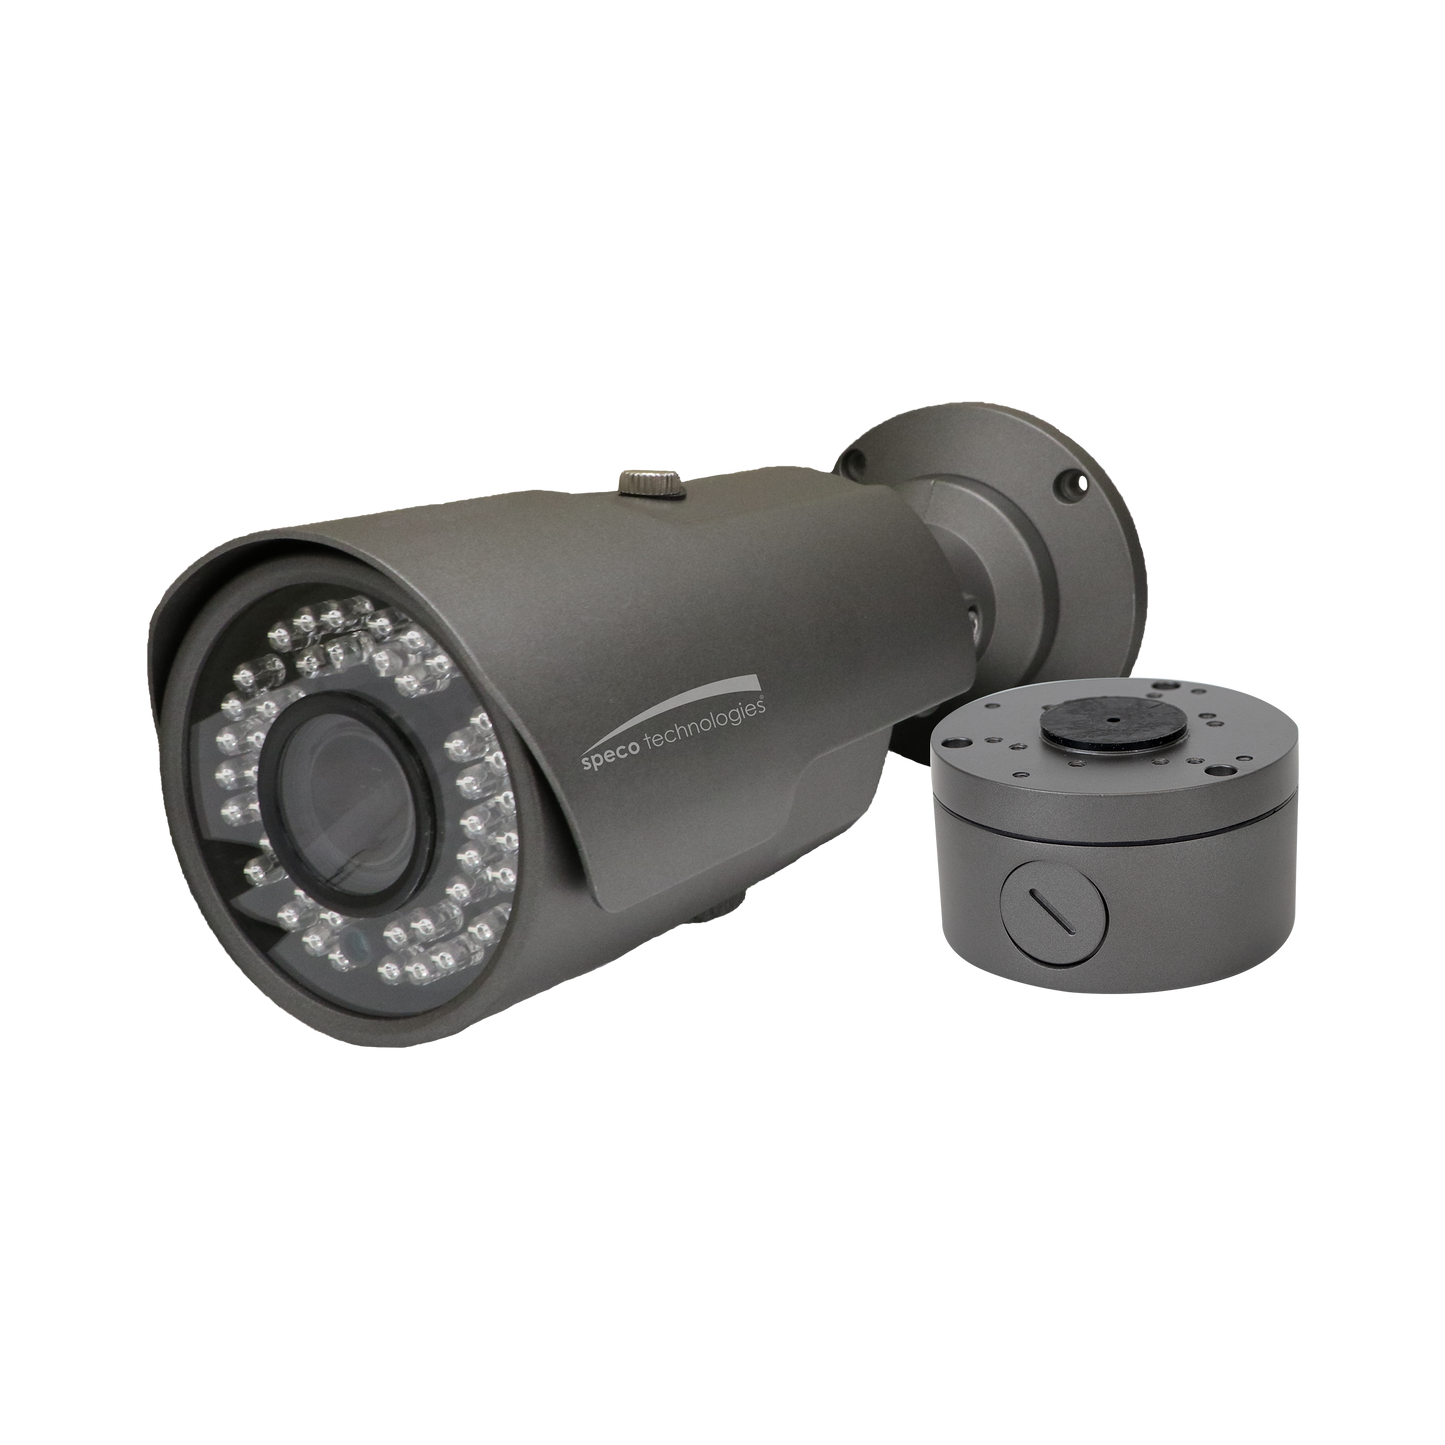 2MP HD-TVI IR Bullet Camera with Included Junction Box 2.8-12mm motorized lens,